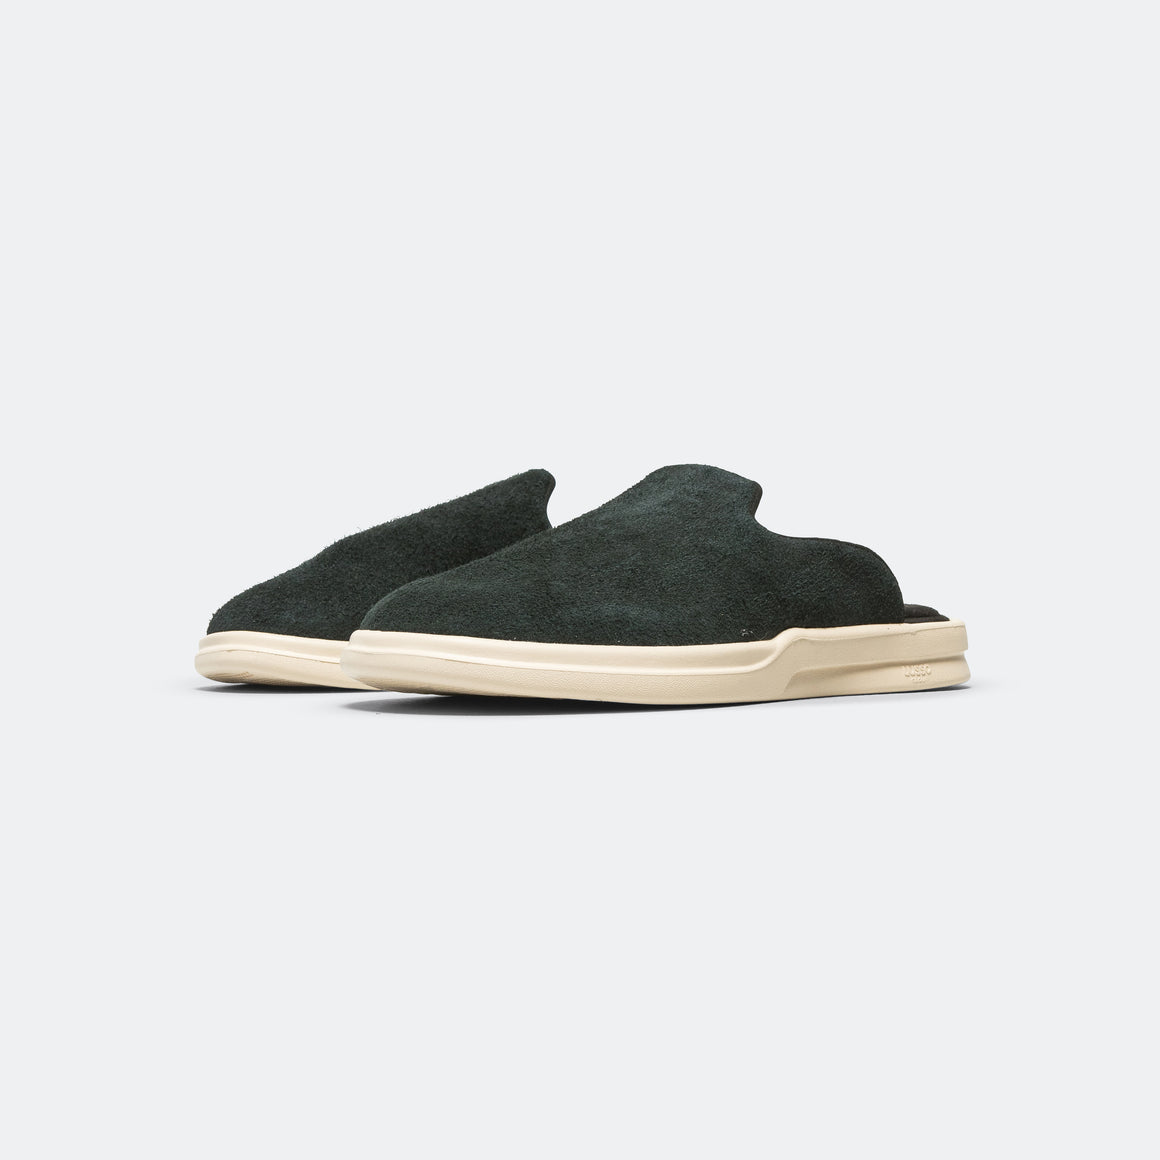 Lusso Cloud - Pelli Hairy Suede - Jet Black - UP THERE